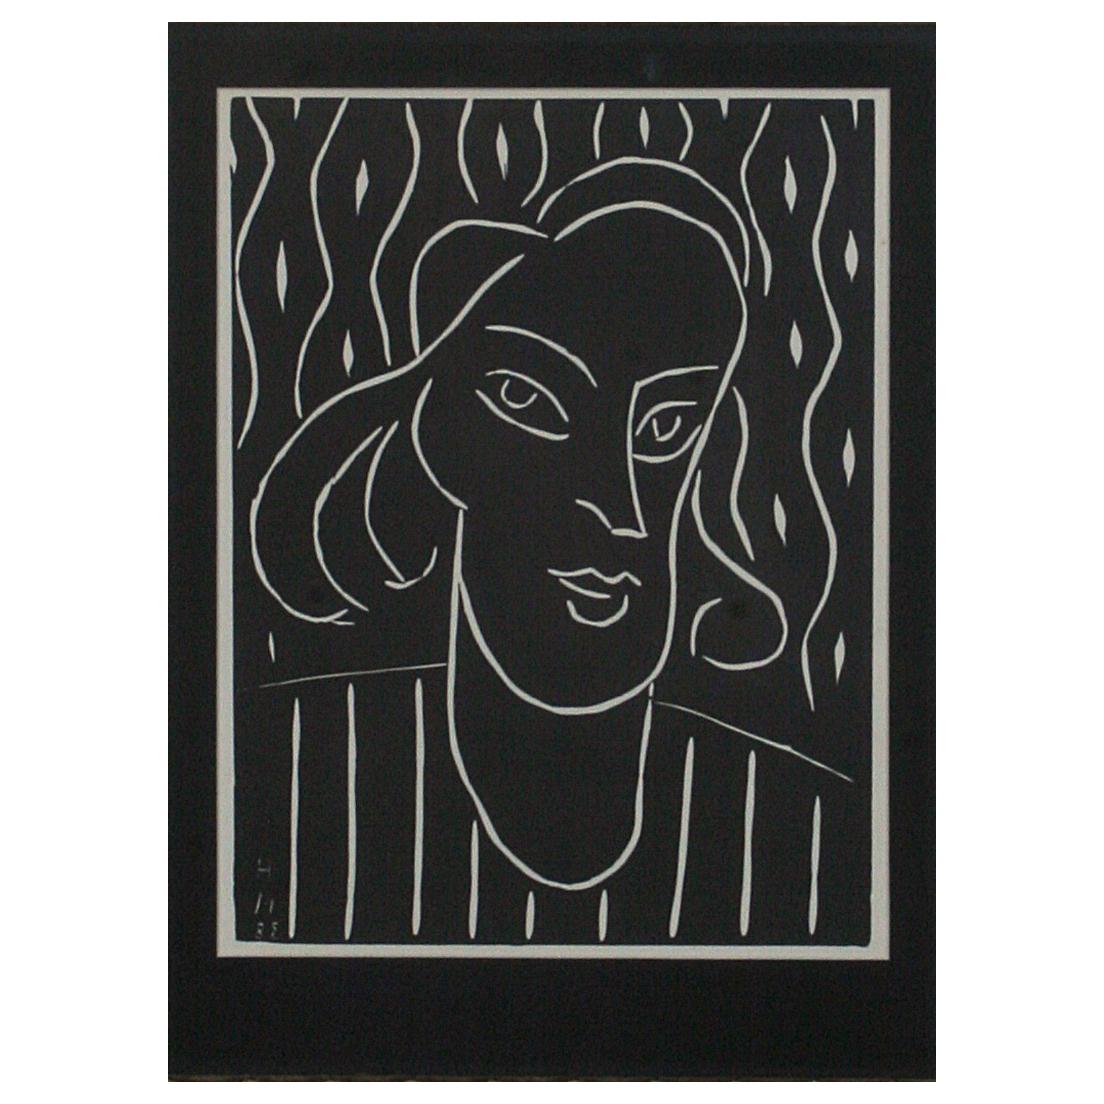 Artist: Henri Matisse, French (1869 - 1954)
Title: Teeny
Year: 1938
Medium: Linocut, signed and dated in the plate
Framed and matted behind glass.
Framed Dimension: 31ʺW × 2ʺD × 27.5ʺH
Styles: AbstractModern
Artist:Henri Matisse
Materials: Linocut